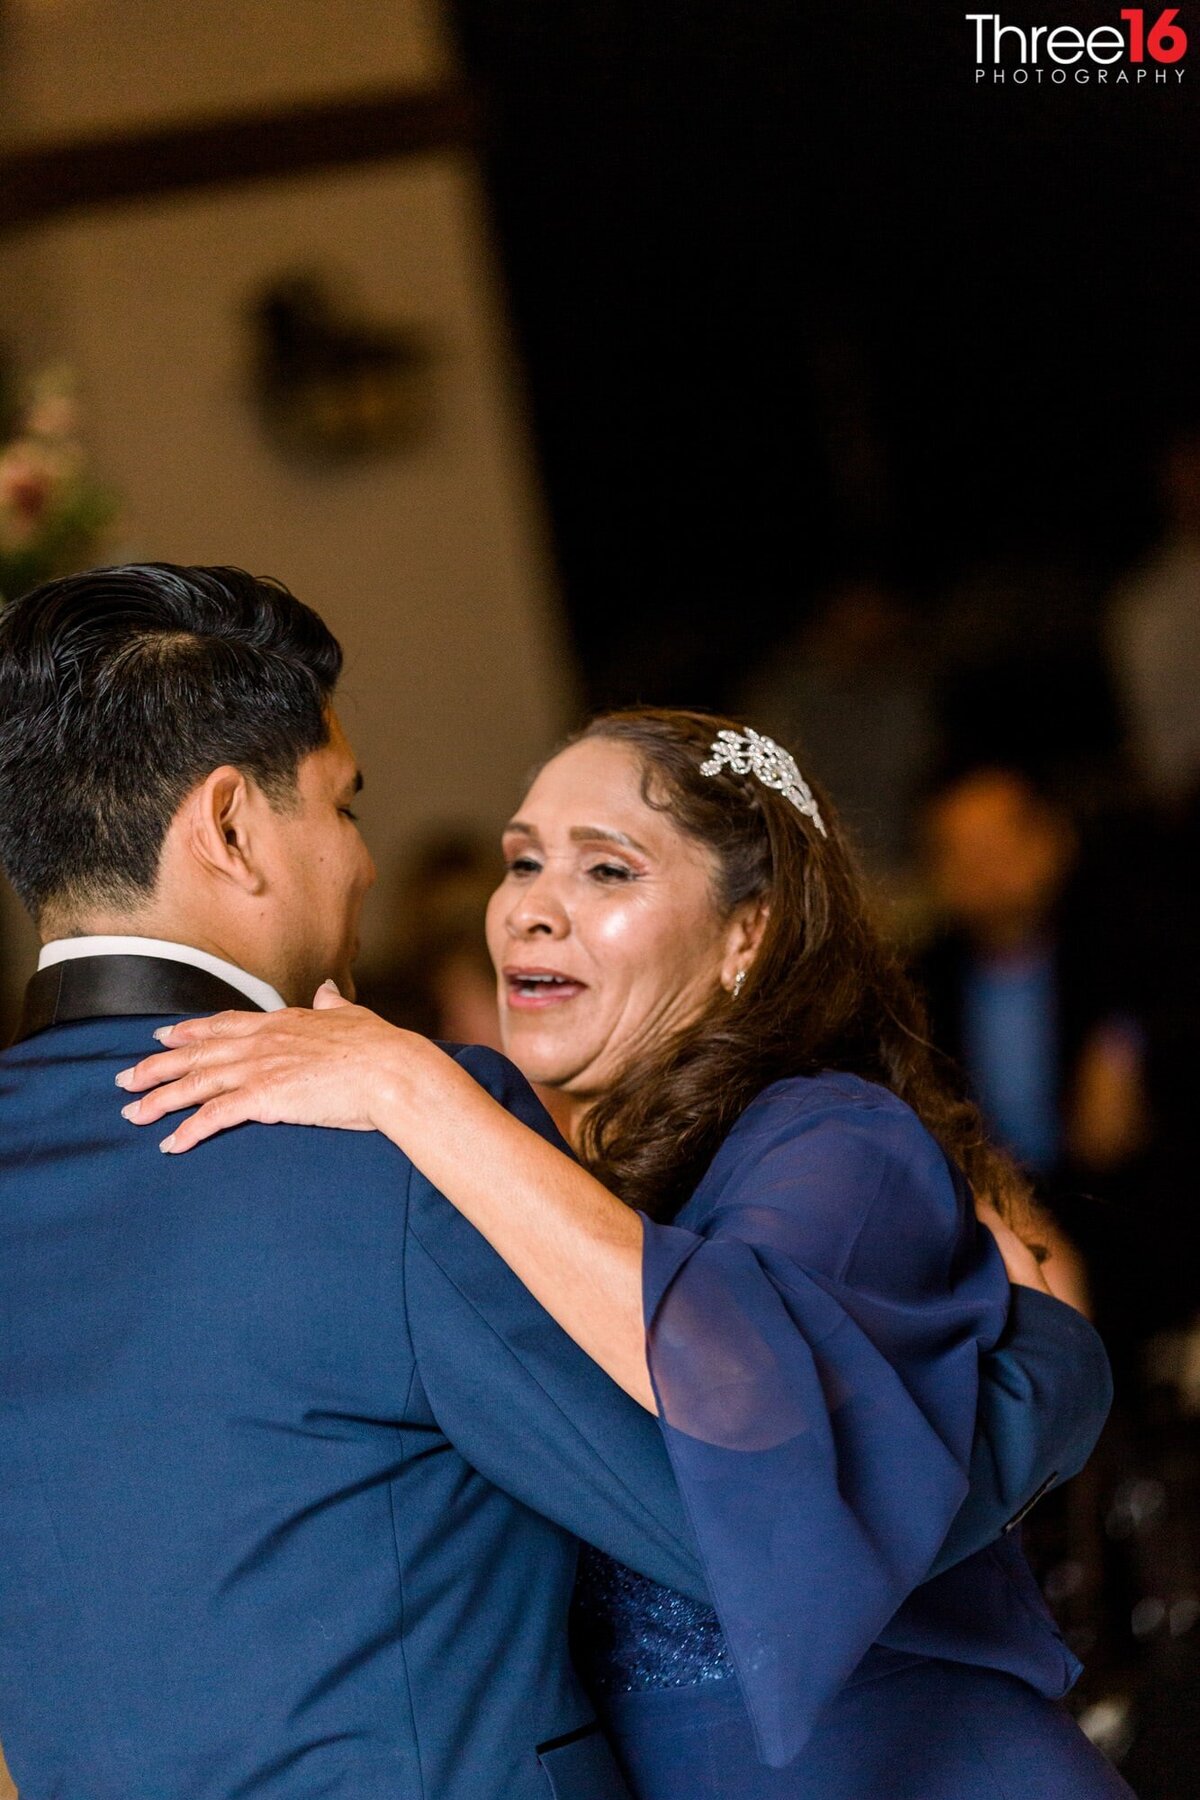 Groom shares a special dance with his mother on his wedding day